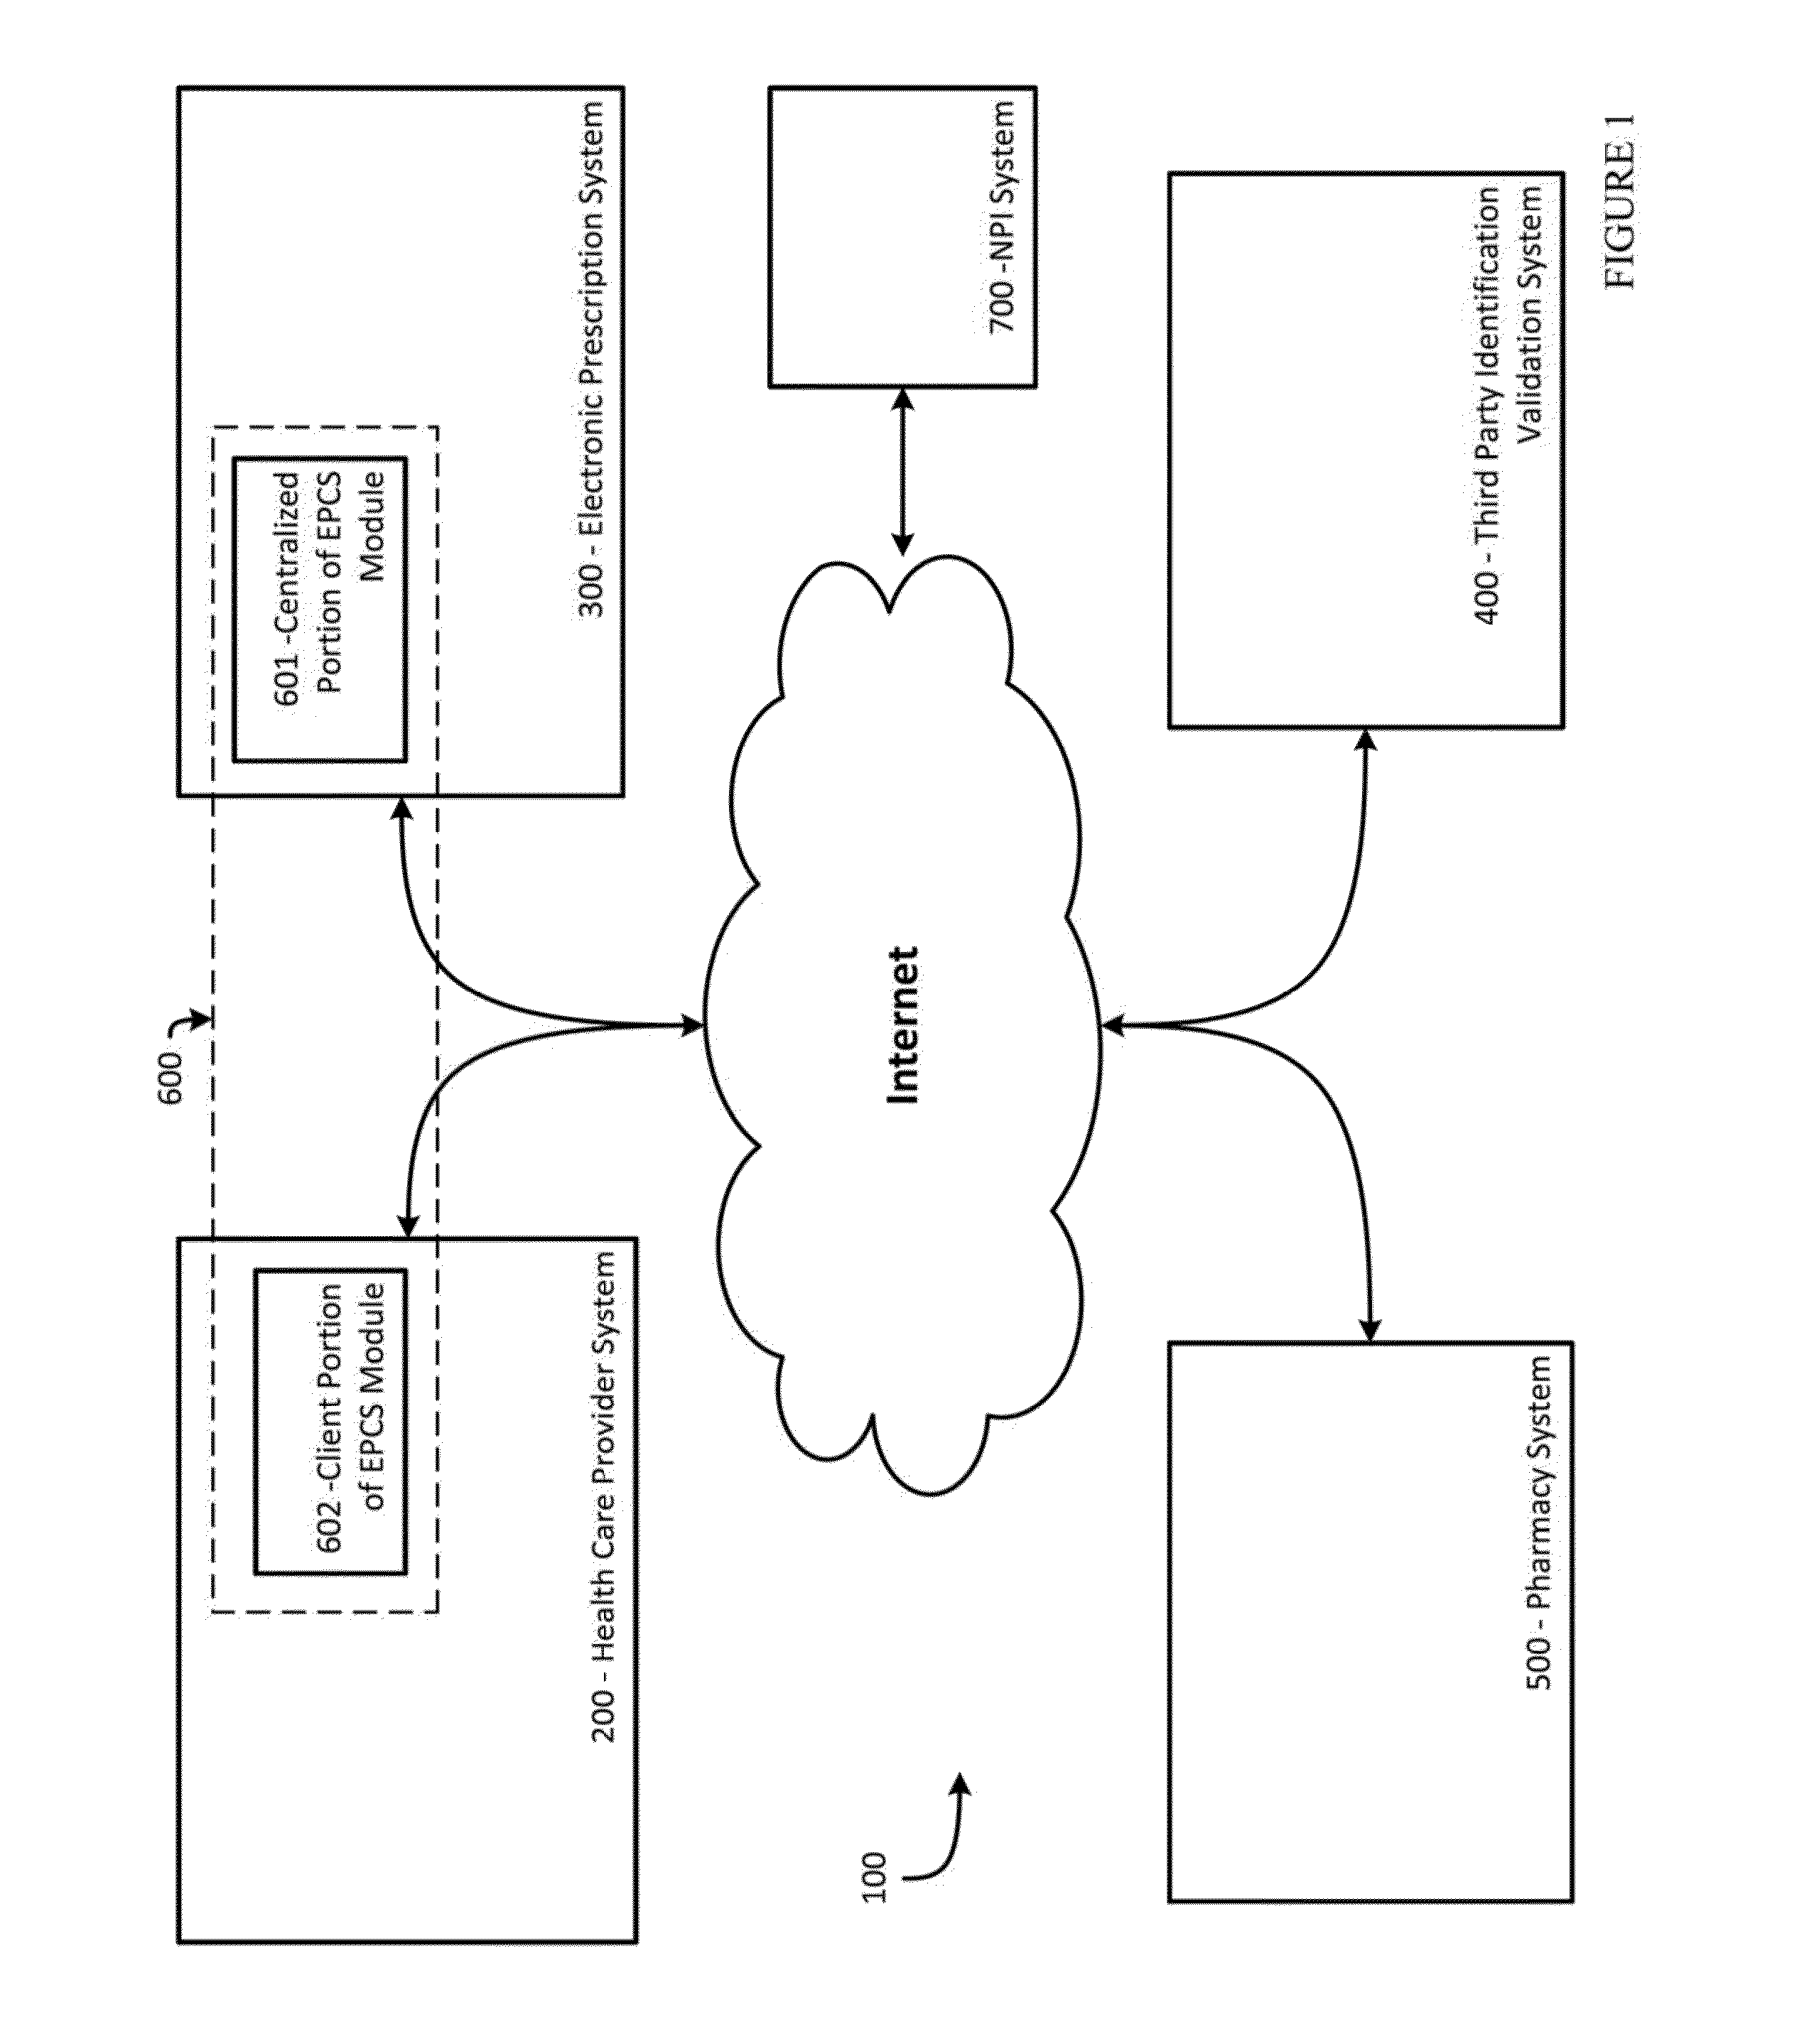 Systems and methods for electronically prescribing controlled substances